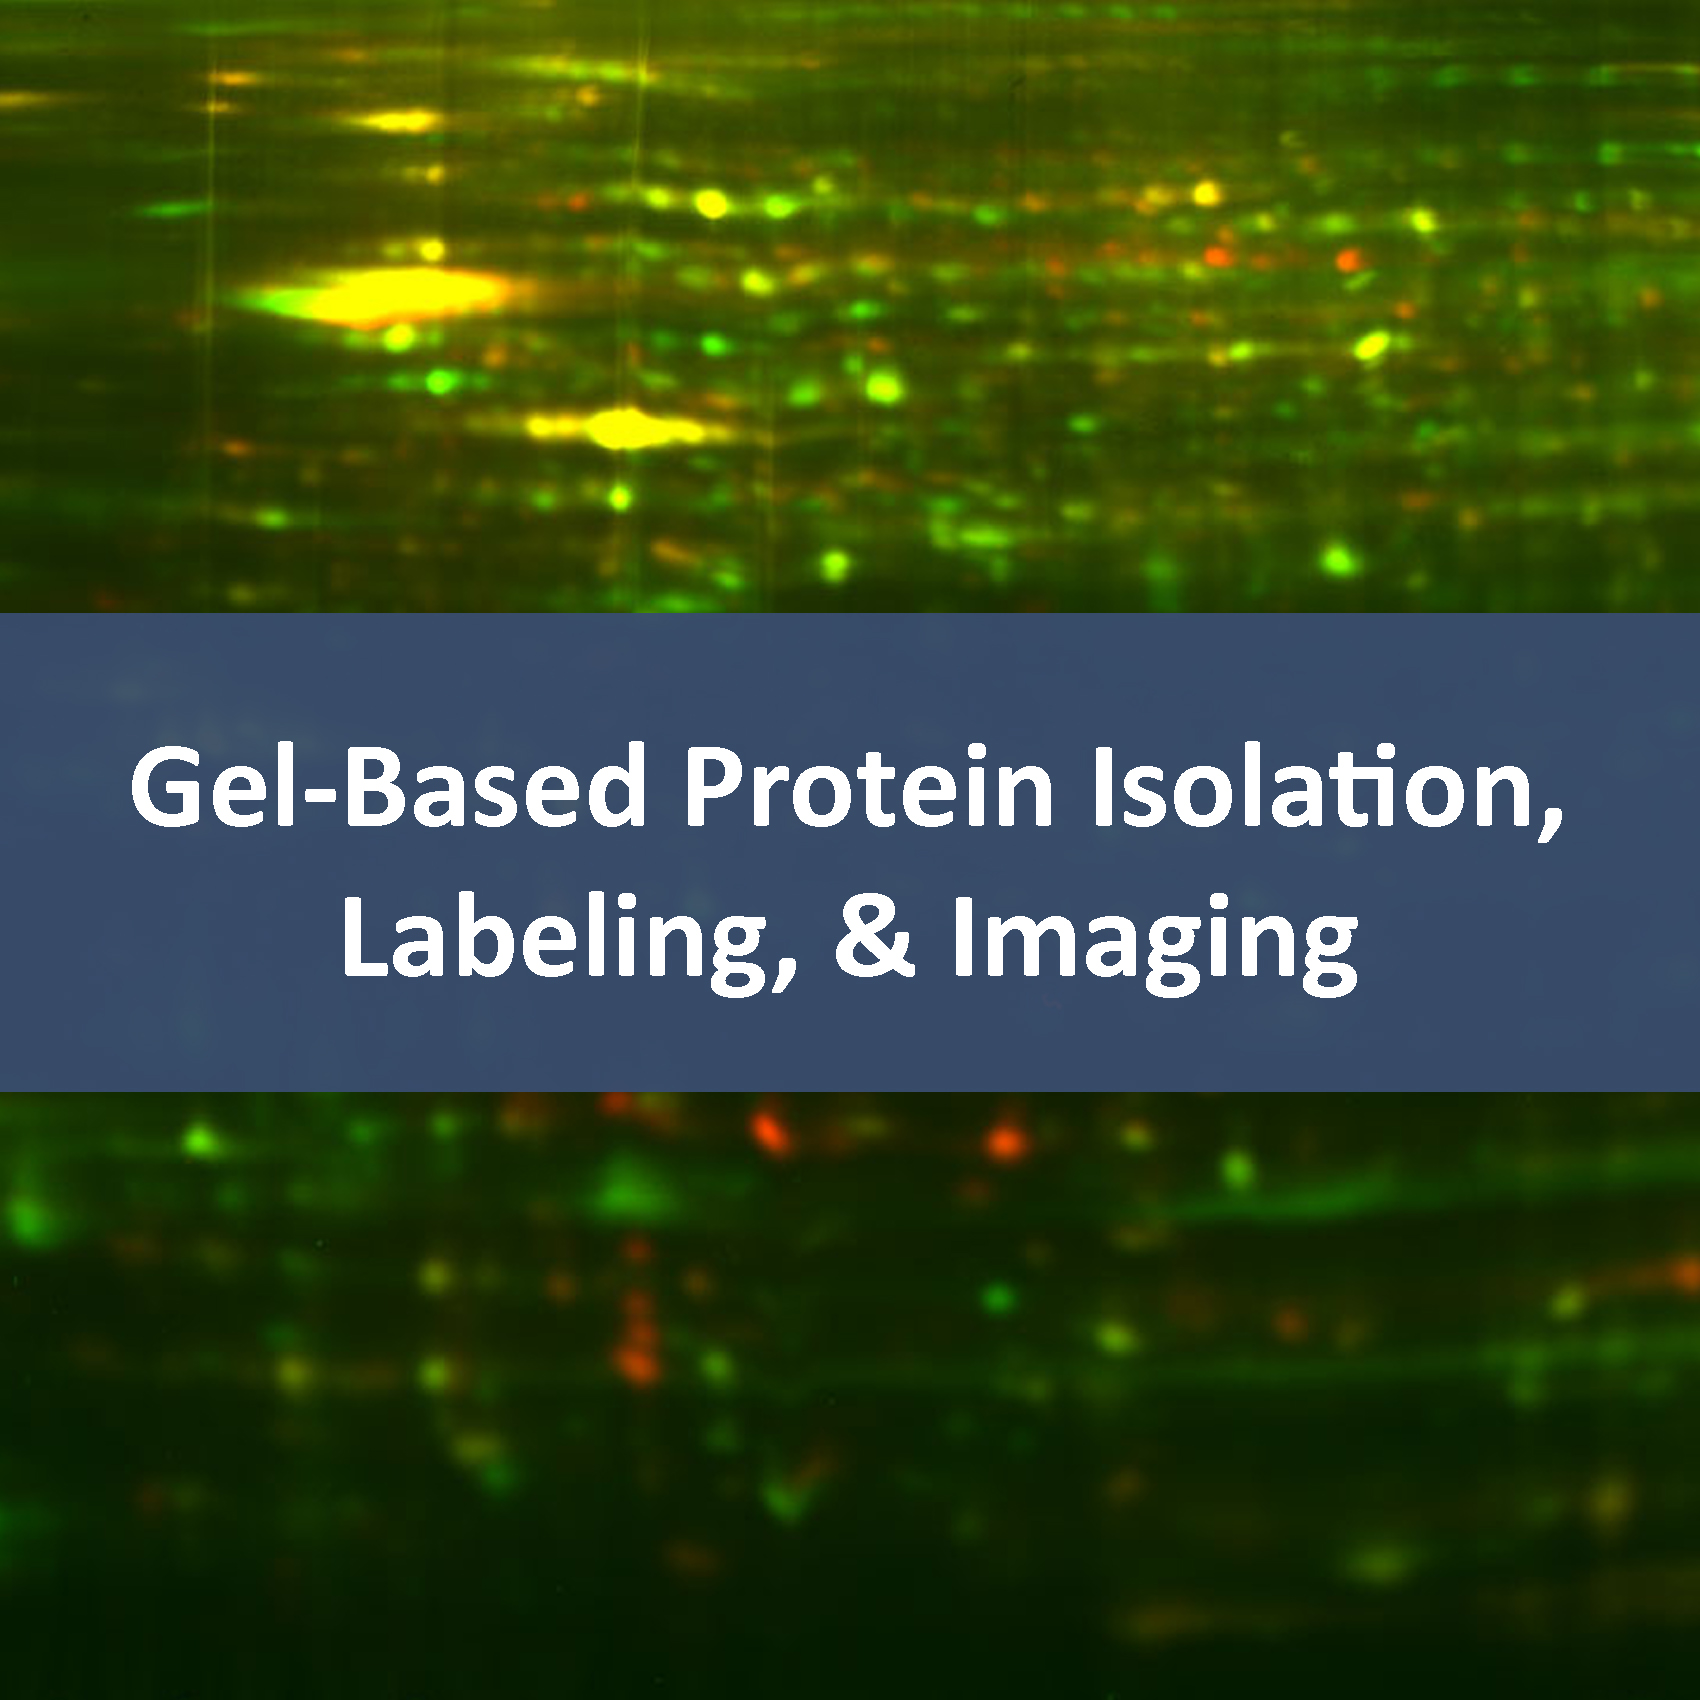 Gel-Based Protein Isolation, Labeling & Imaging